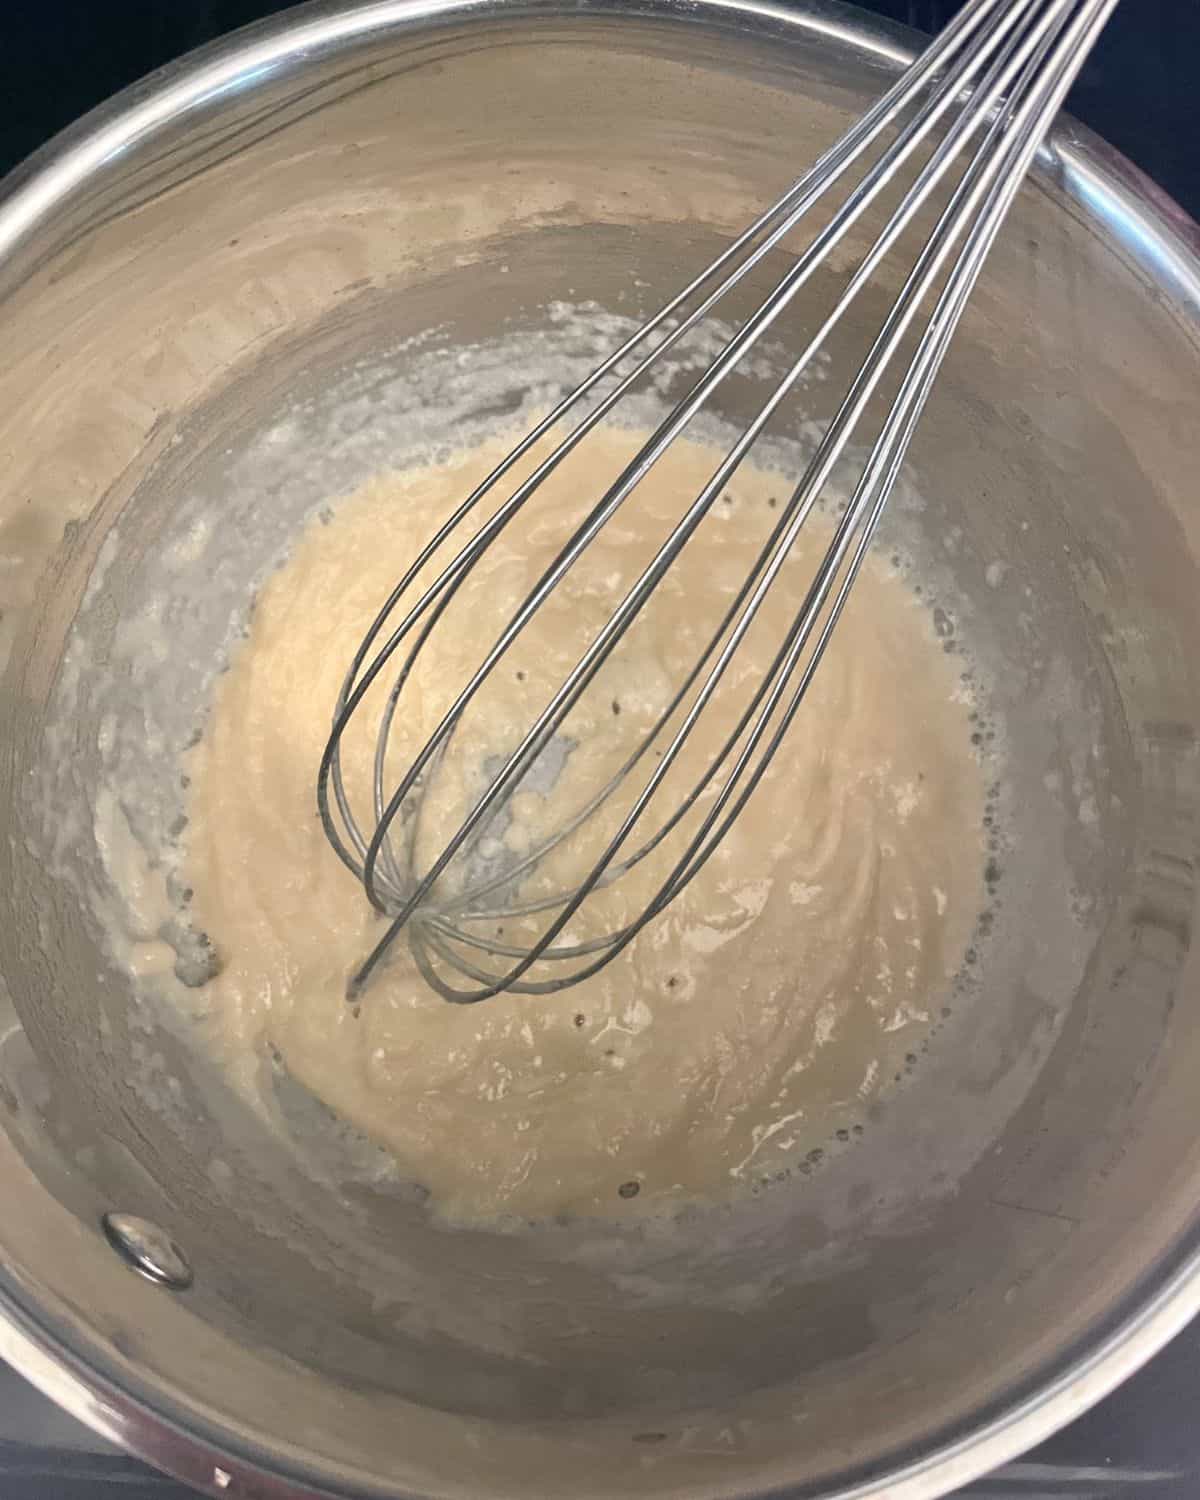 Flour added to the butter to form a roux, in a saucepan with a whisk.